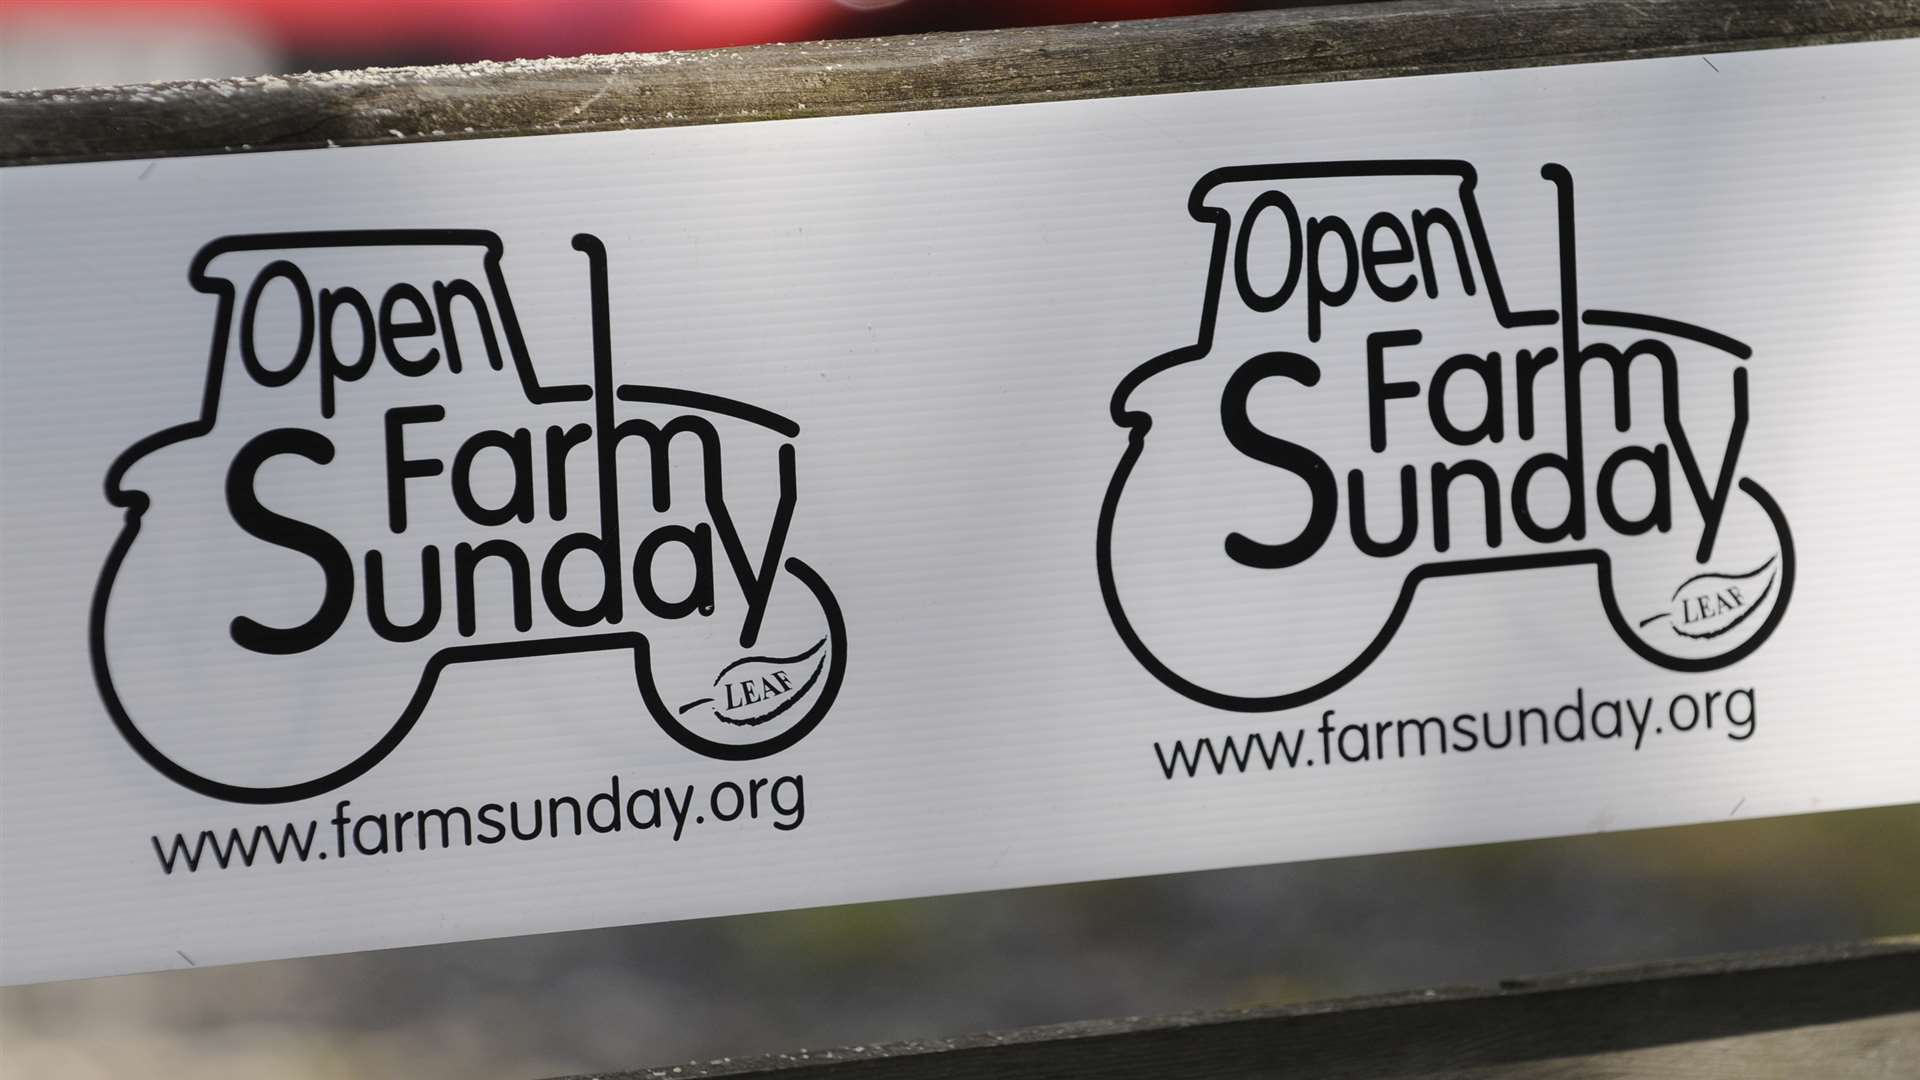 Open Farm Sunday is this weekend